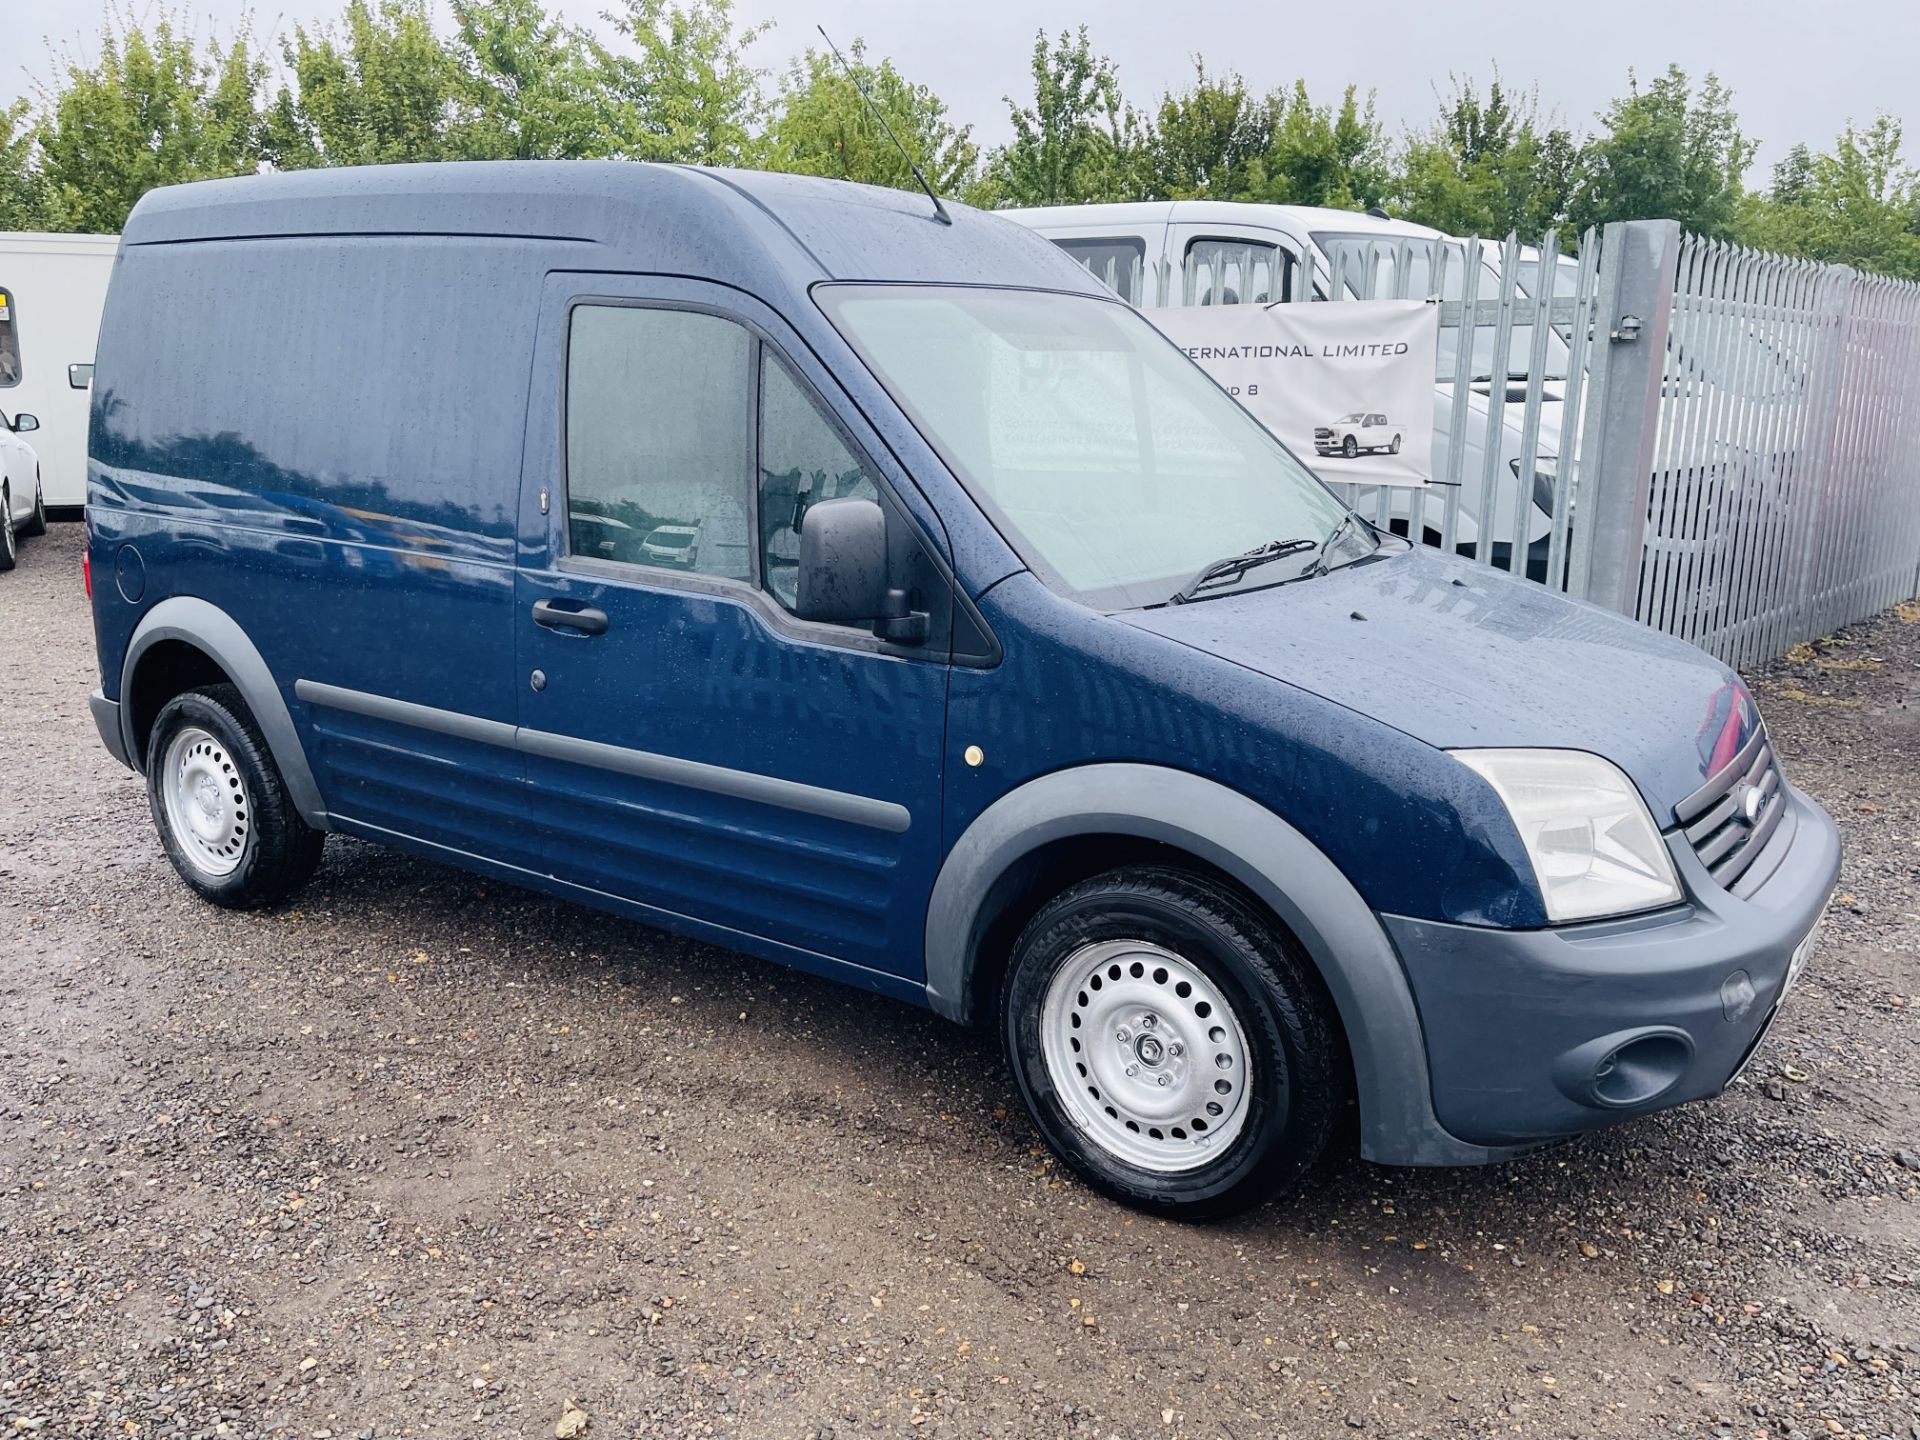 ** ON SALE **Ford Transit Connect 1.8 TDCI 90 T230 LWB HI Roof 2013 '13 Reg' Air con - Elec Pack - - Image 14 of 18